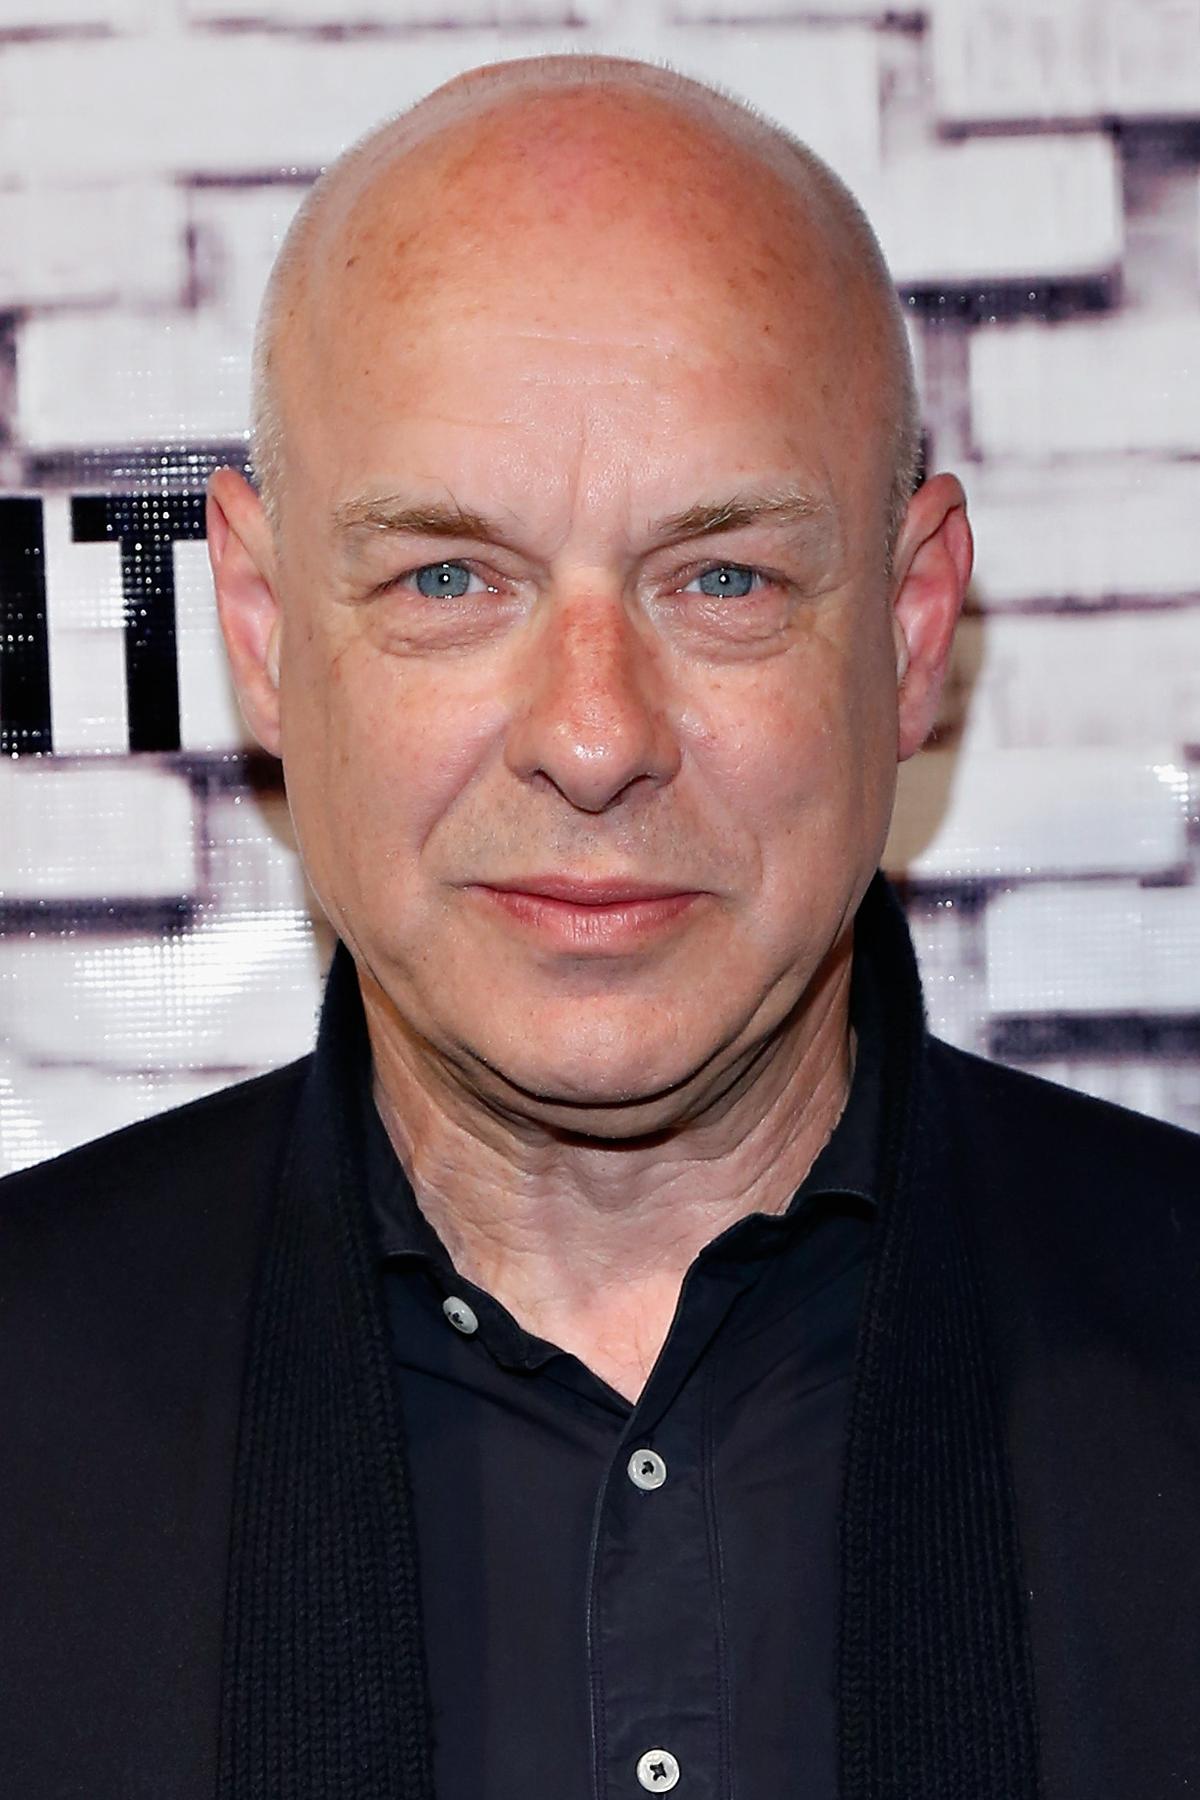 Brian Eno in New York on May 7, 2013. (Cindy Ord/Getty Images)